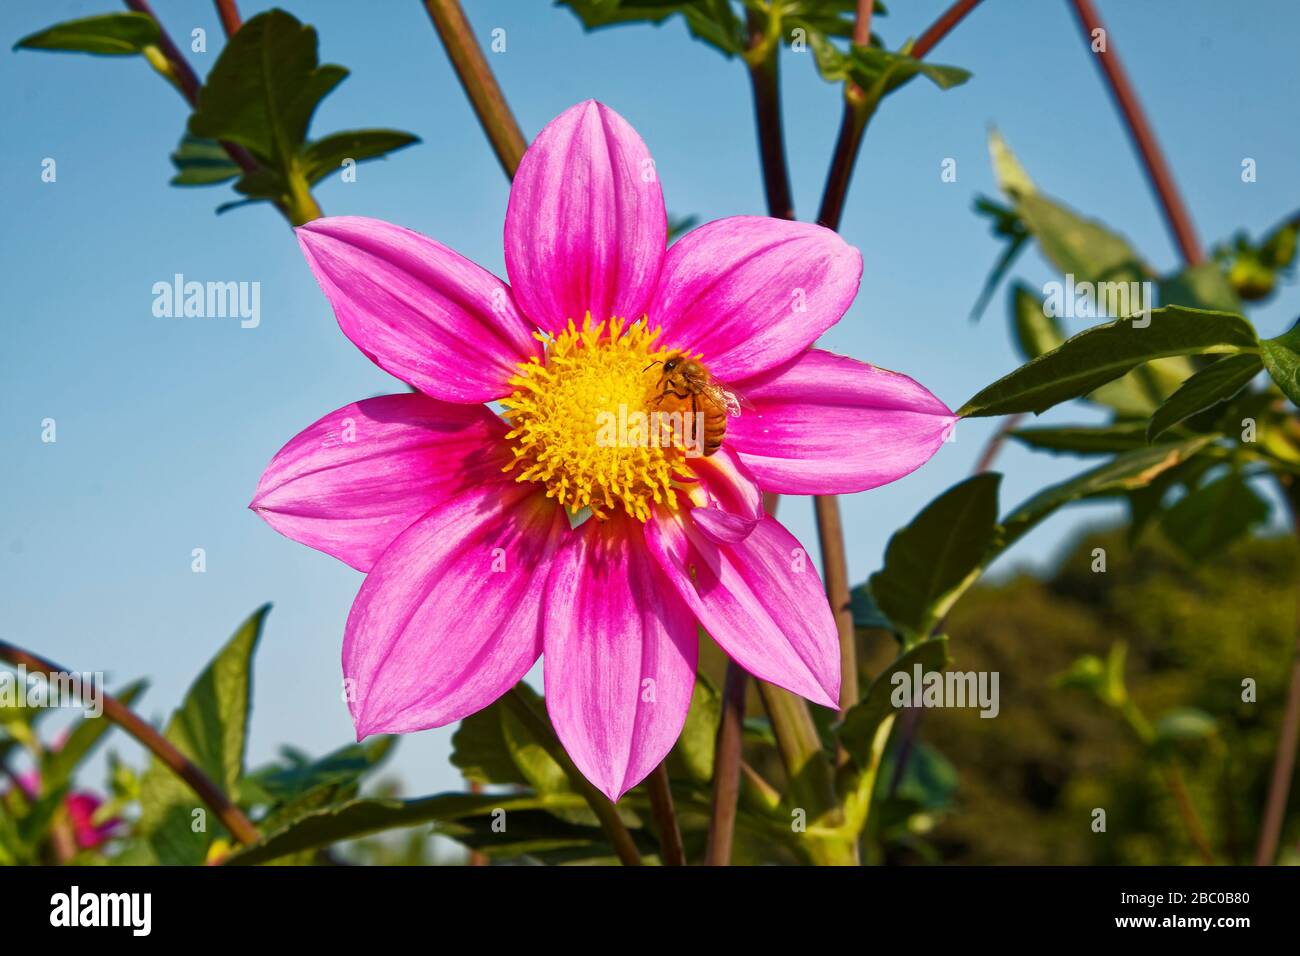 dahlia; rose color, close-up, bee, cultivated flower; blue sky, garden, Asteraceae family, tuberous, perennial, nature, summer Stock Photo